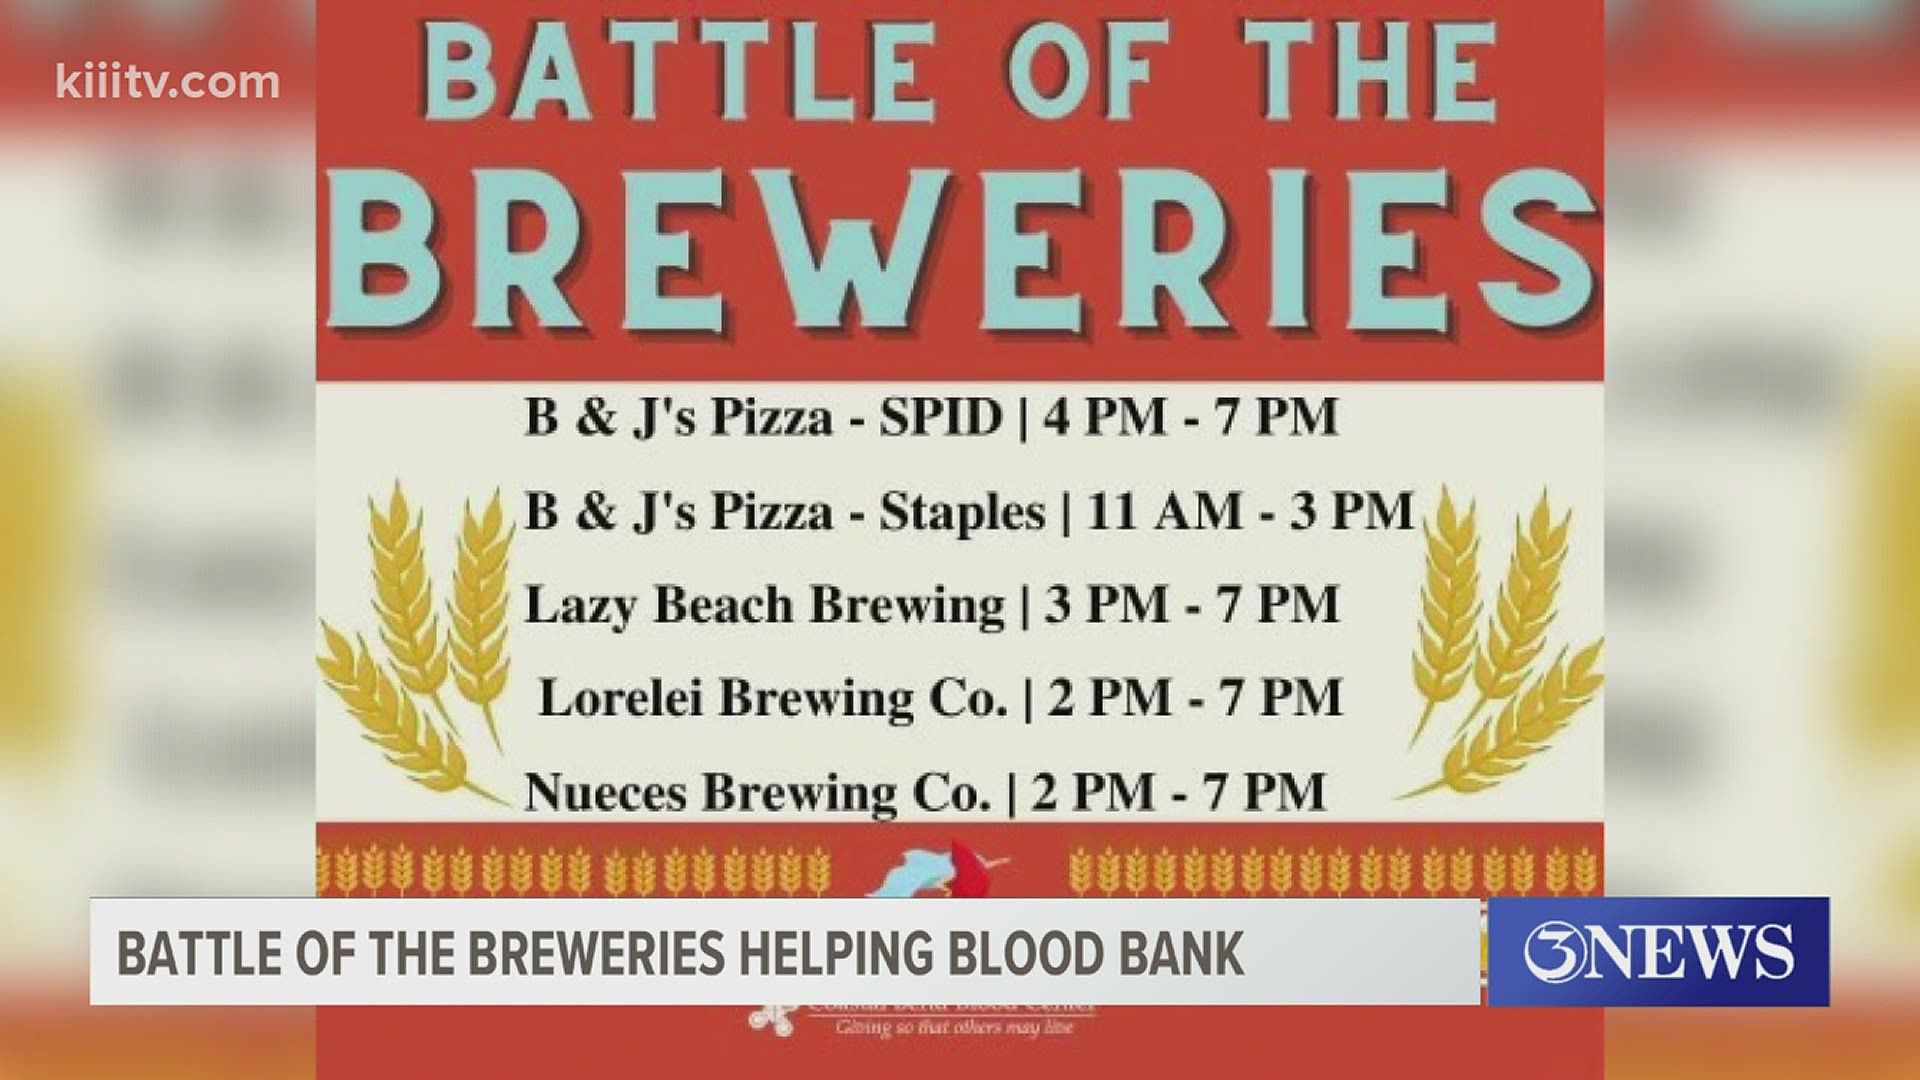 The Battle of the Breweries is happening Saturday in Corpus Christi.